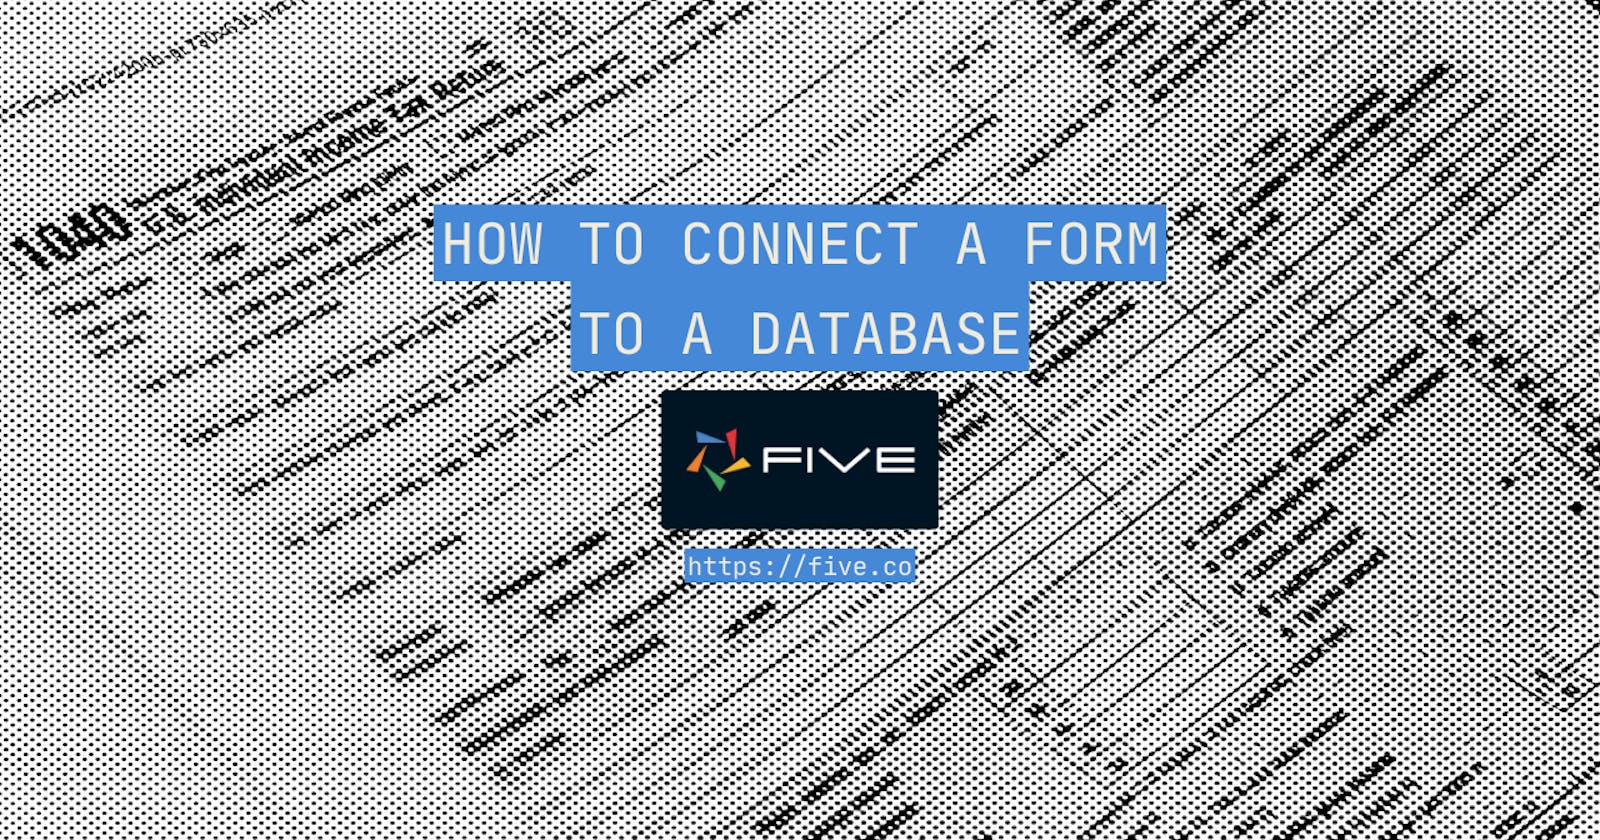 How To Connect a Form to a Database